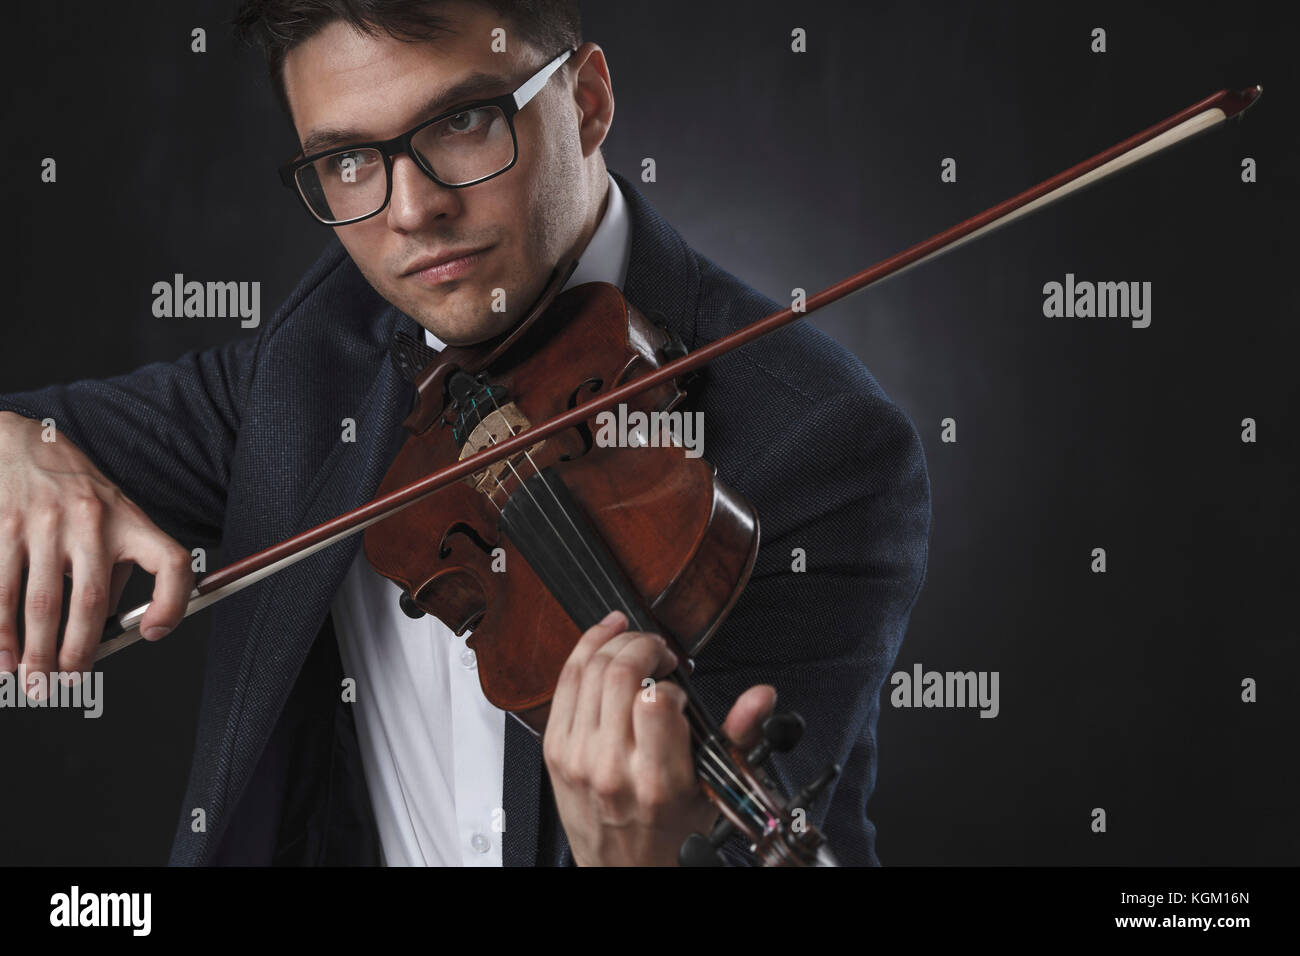 Handsome man wearing formals playing violin against black background Stock Photo